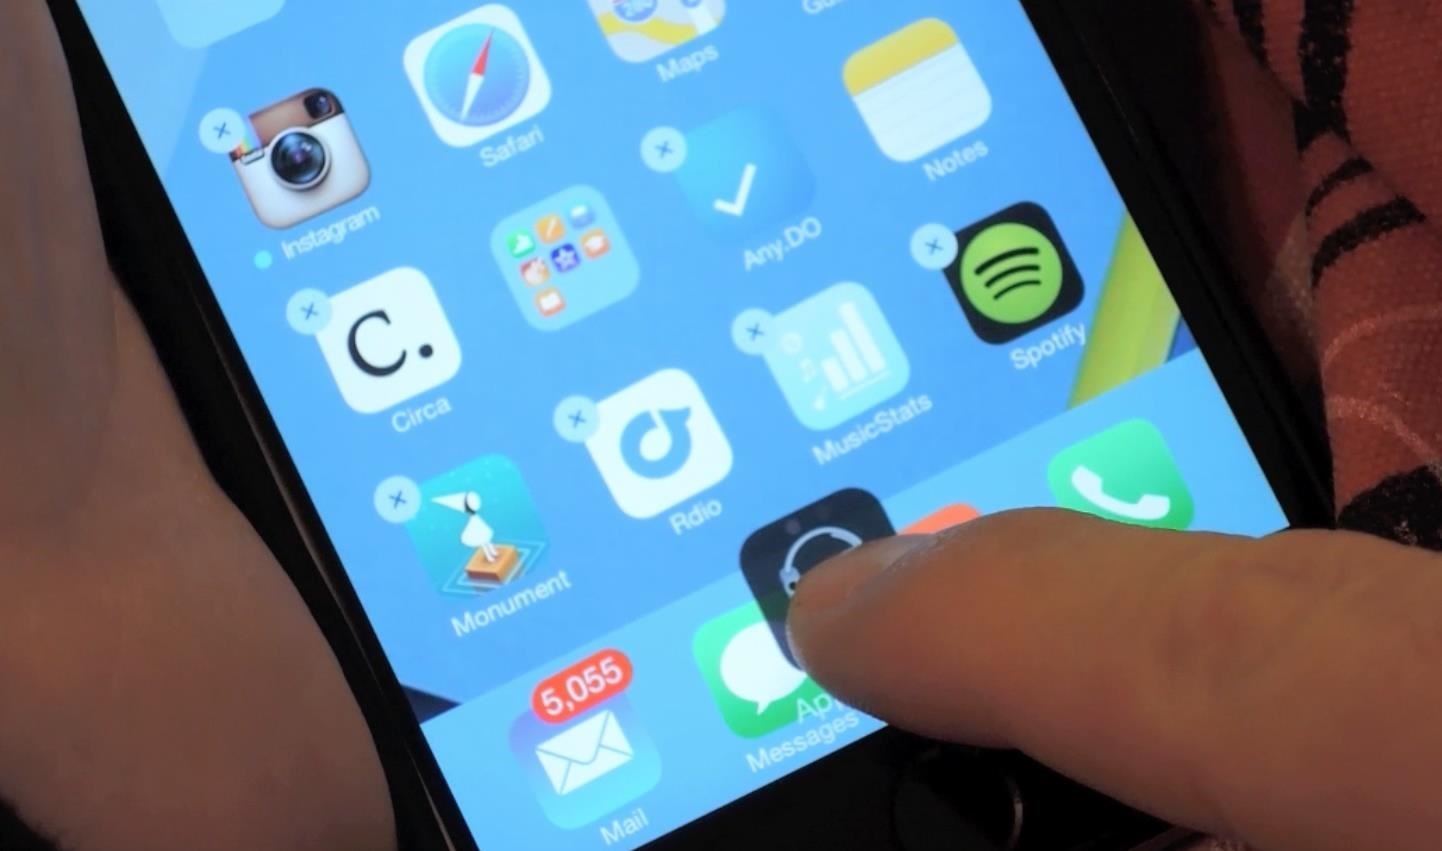 How to Remove the New Apple Watch App from Your iPhone